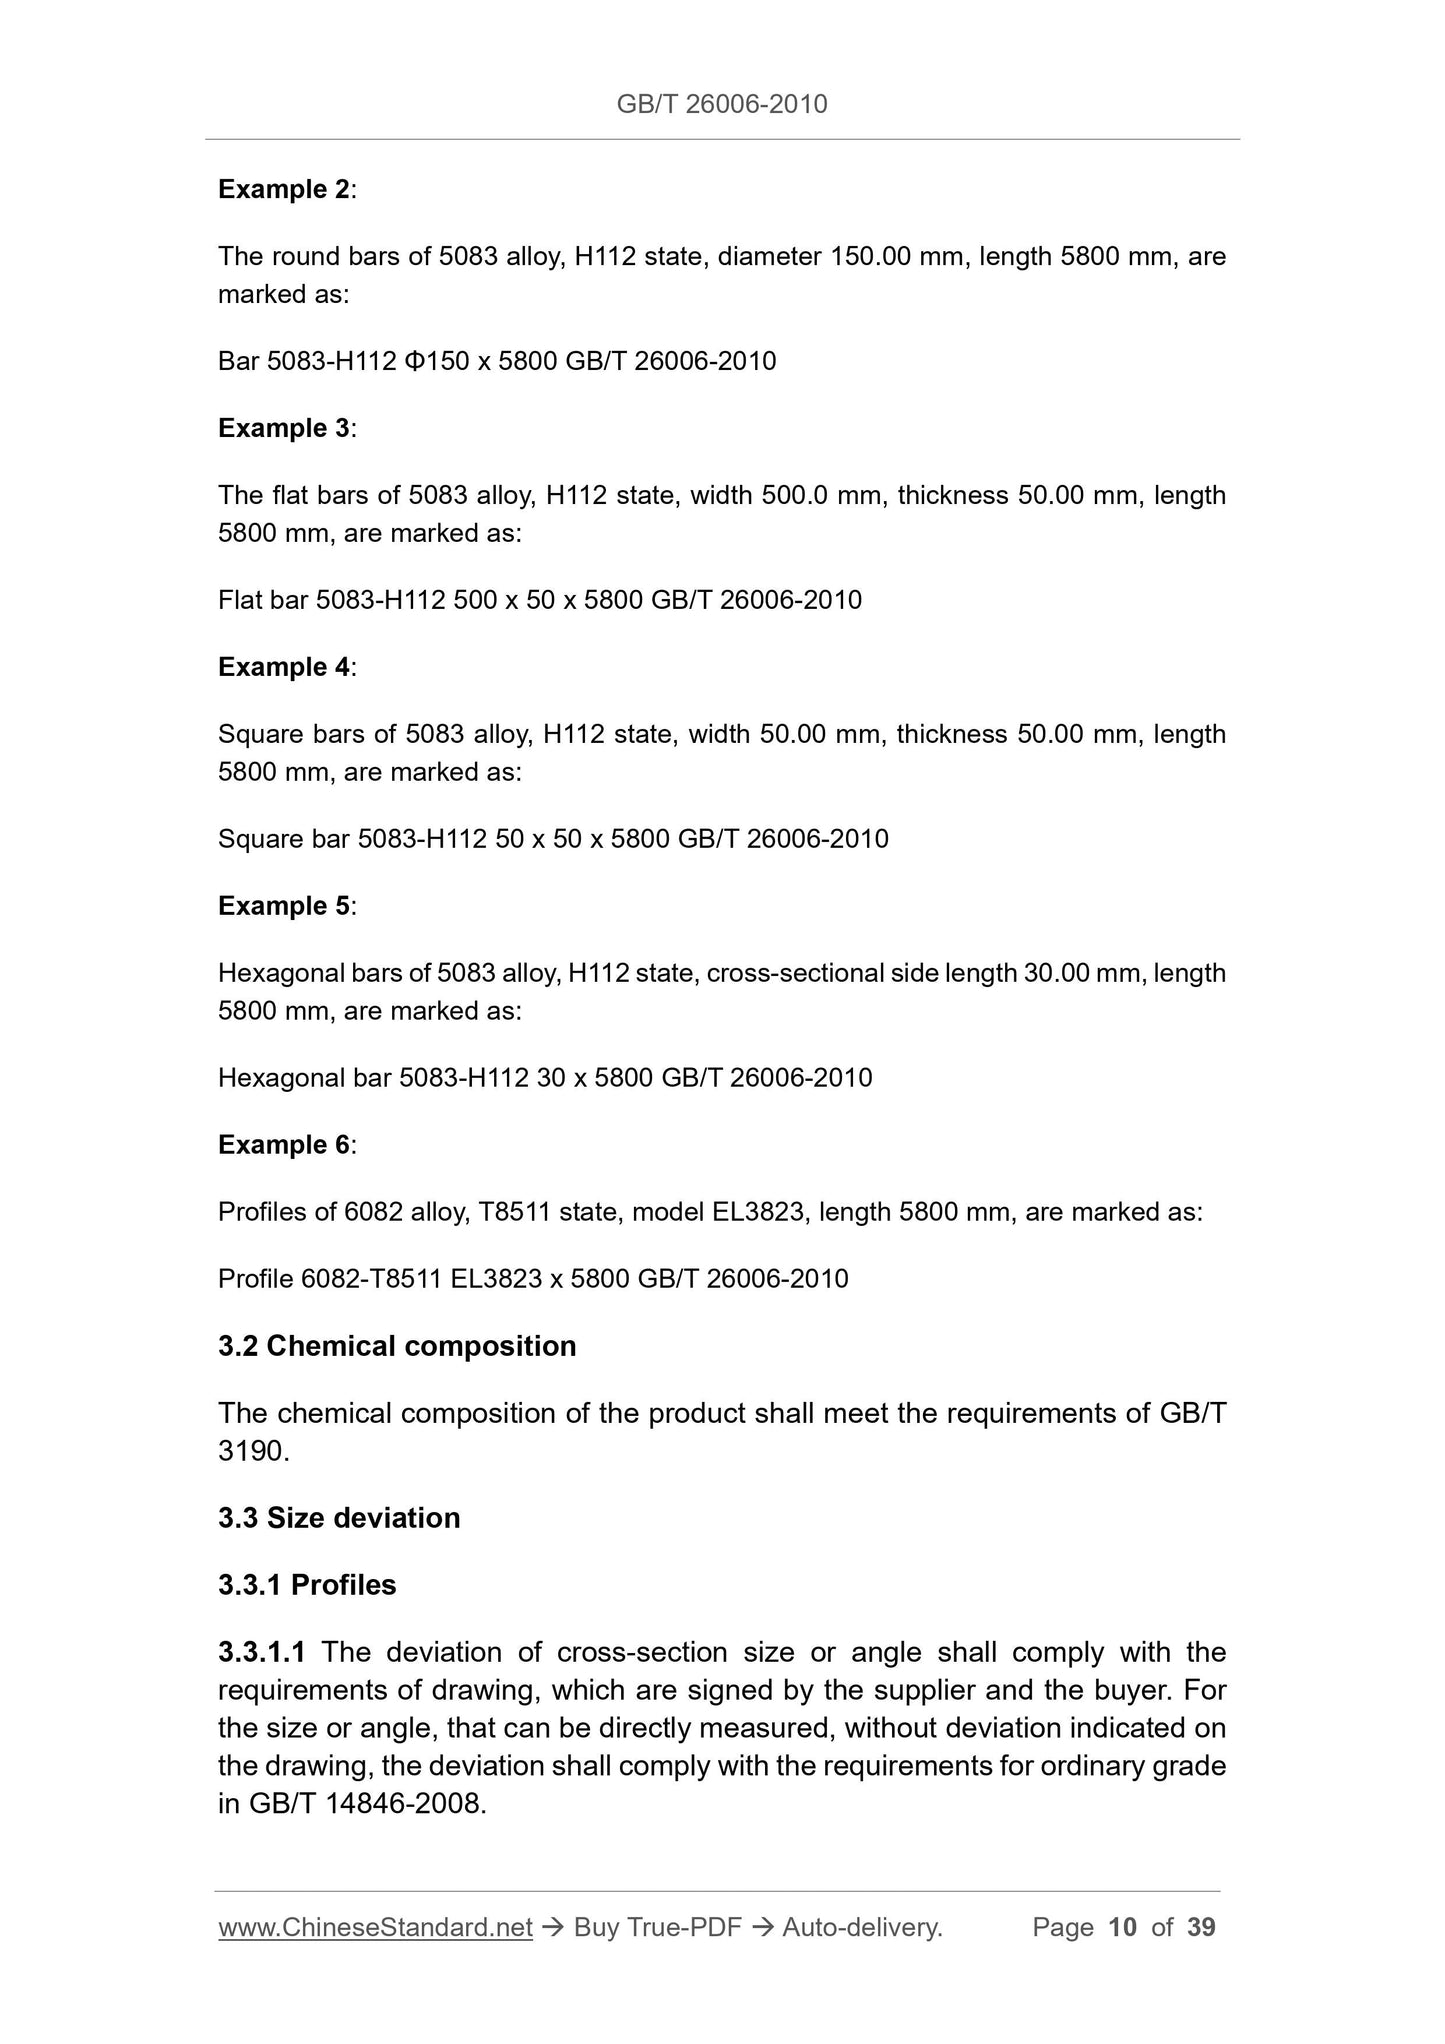 GB/T 26006-2010 Page 4